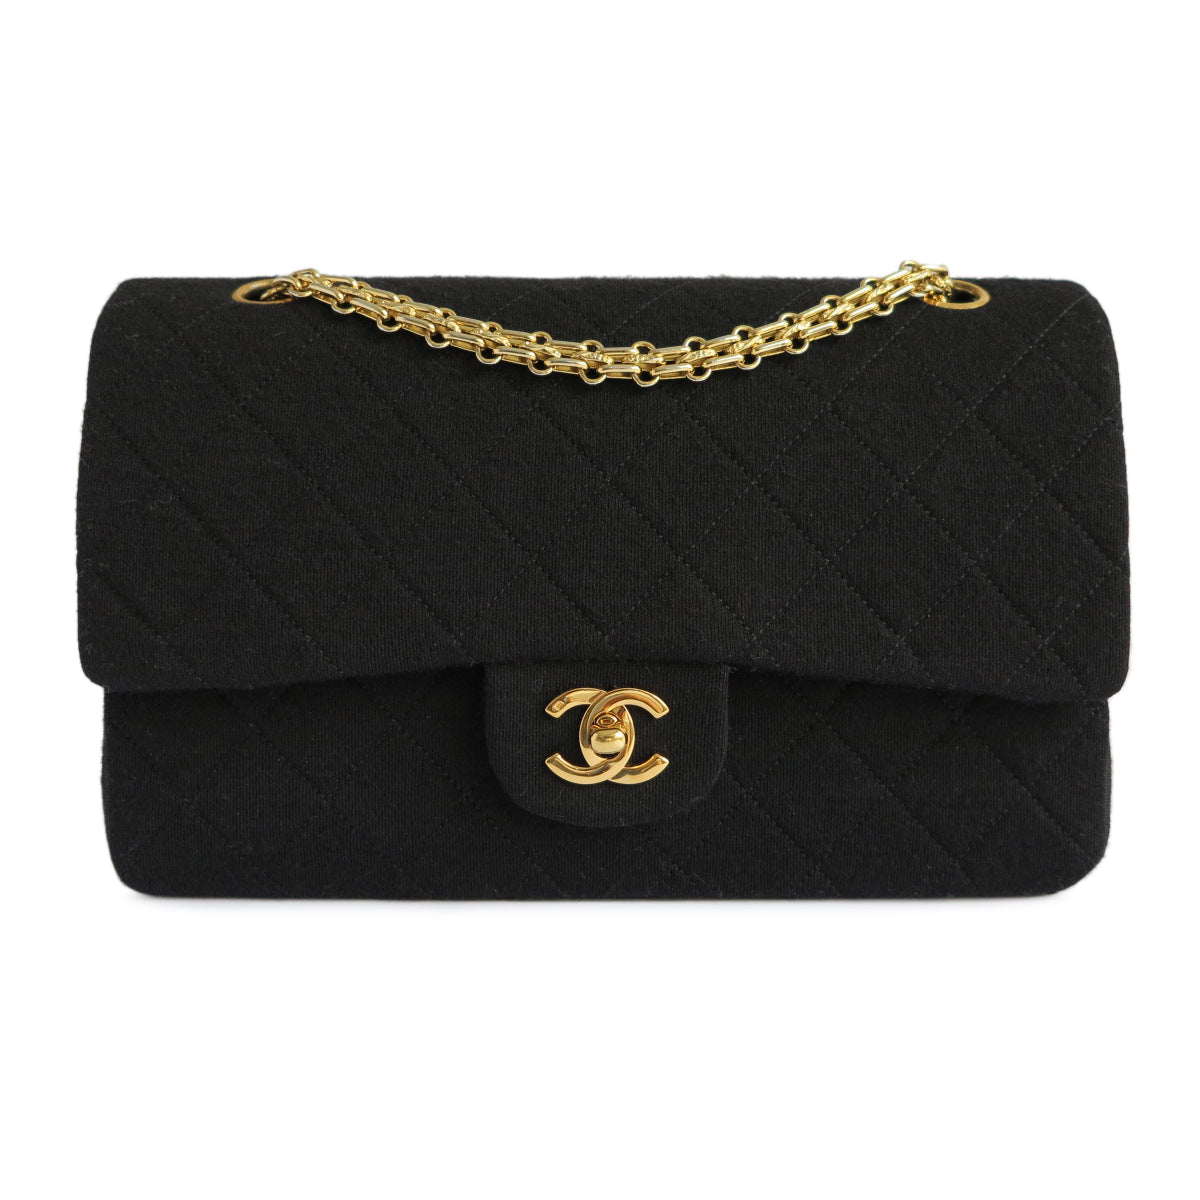 The Ultimate Chanel Flap Guide - Academy by FASHIONPHILE